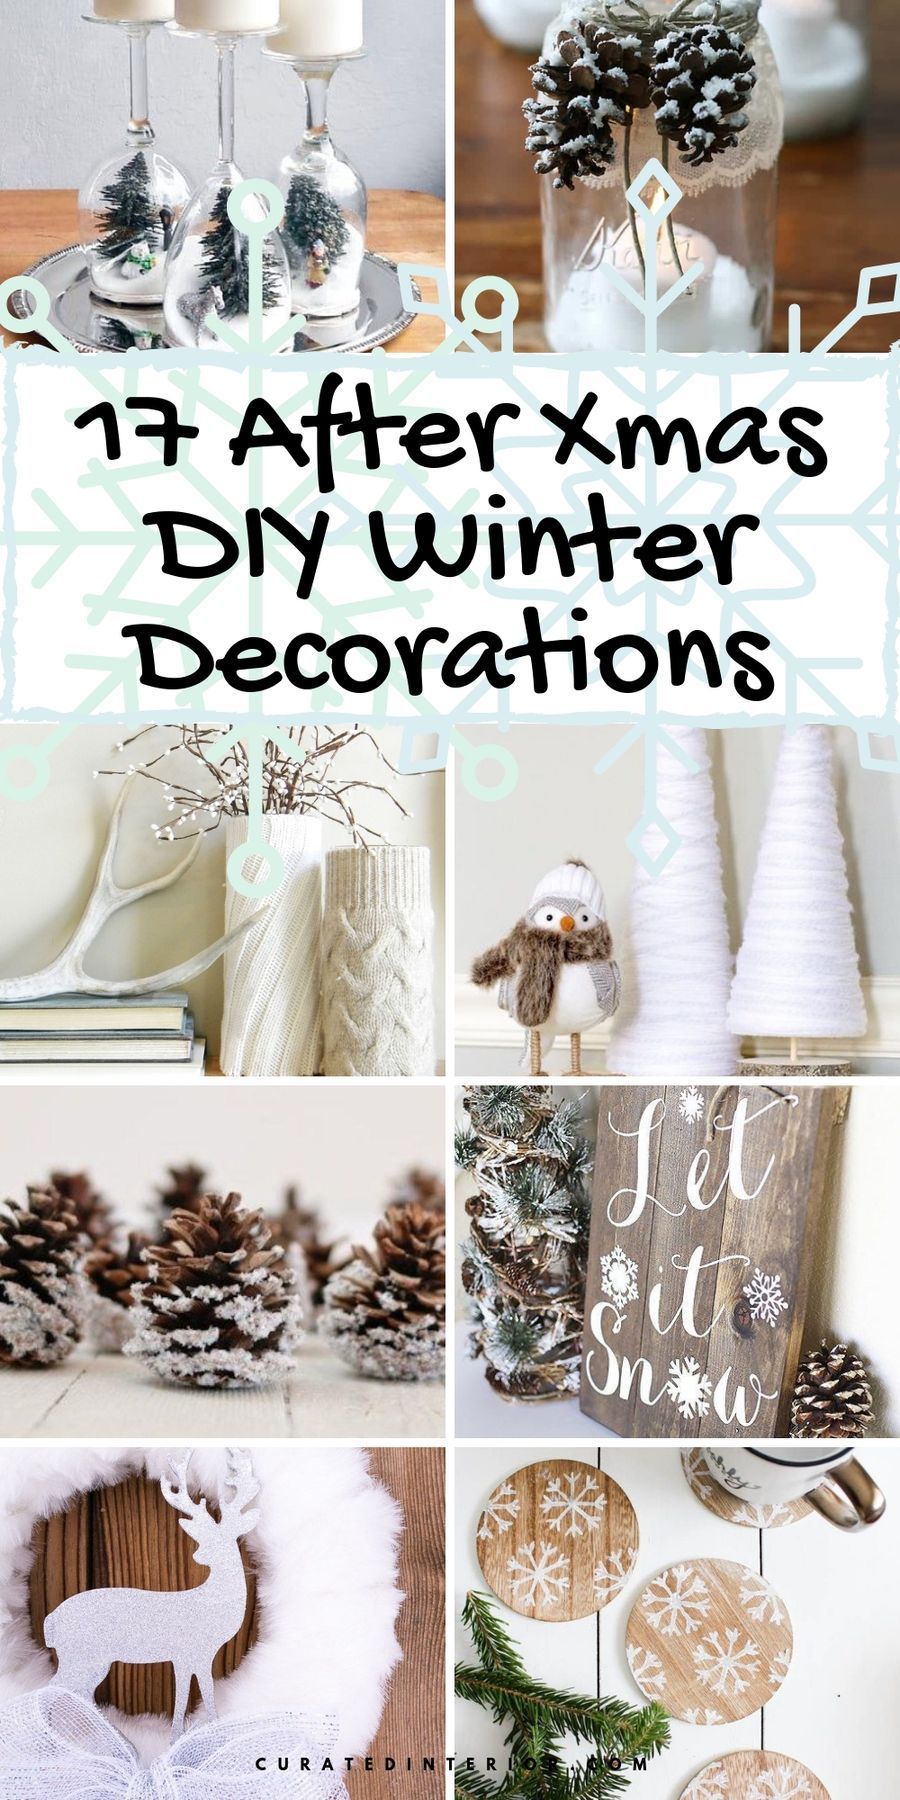 17 DIY Winter Decorations for After-Christmas Decorating -   9 winter room decor DIY ideas